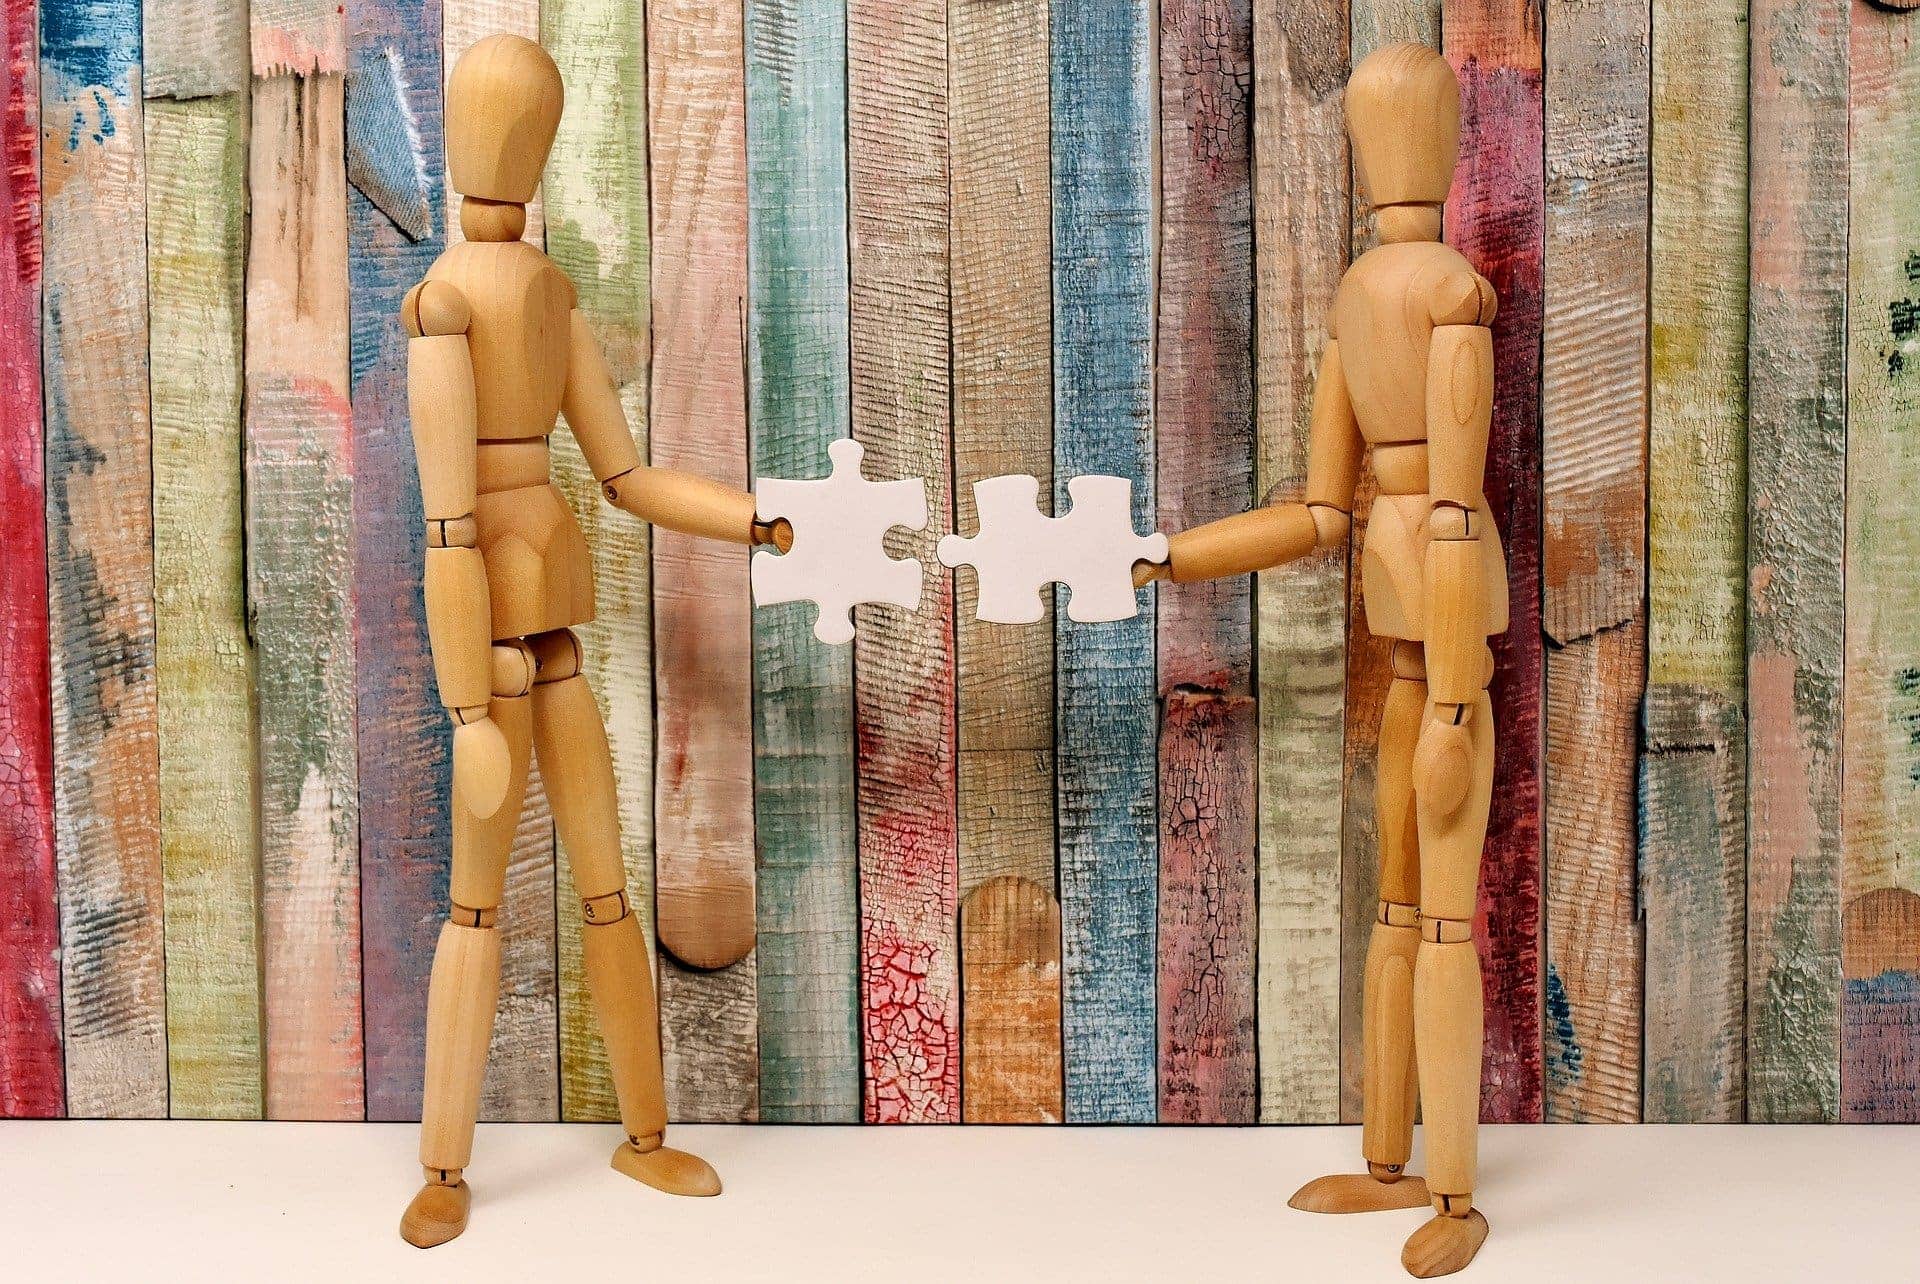 Photo of two wooden art model dummies facing each other, each holding a white puzzle piece, as if they're going to fit them together. Background is a wooden fence painted in a muted rainbow of colors.